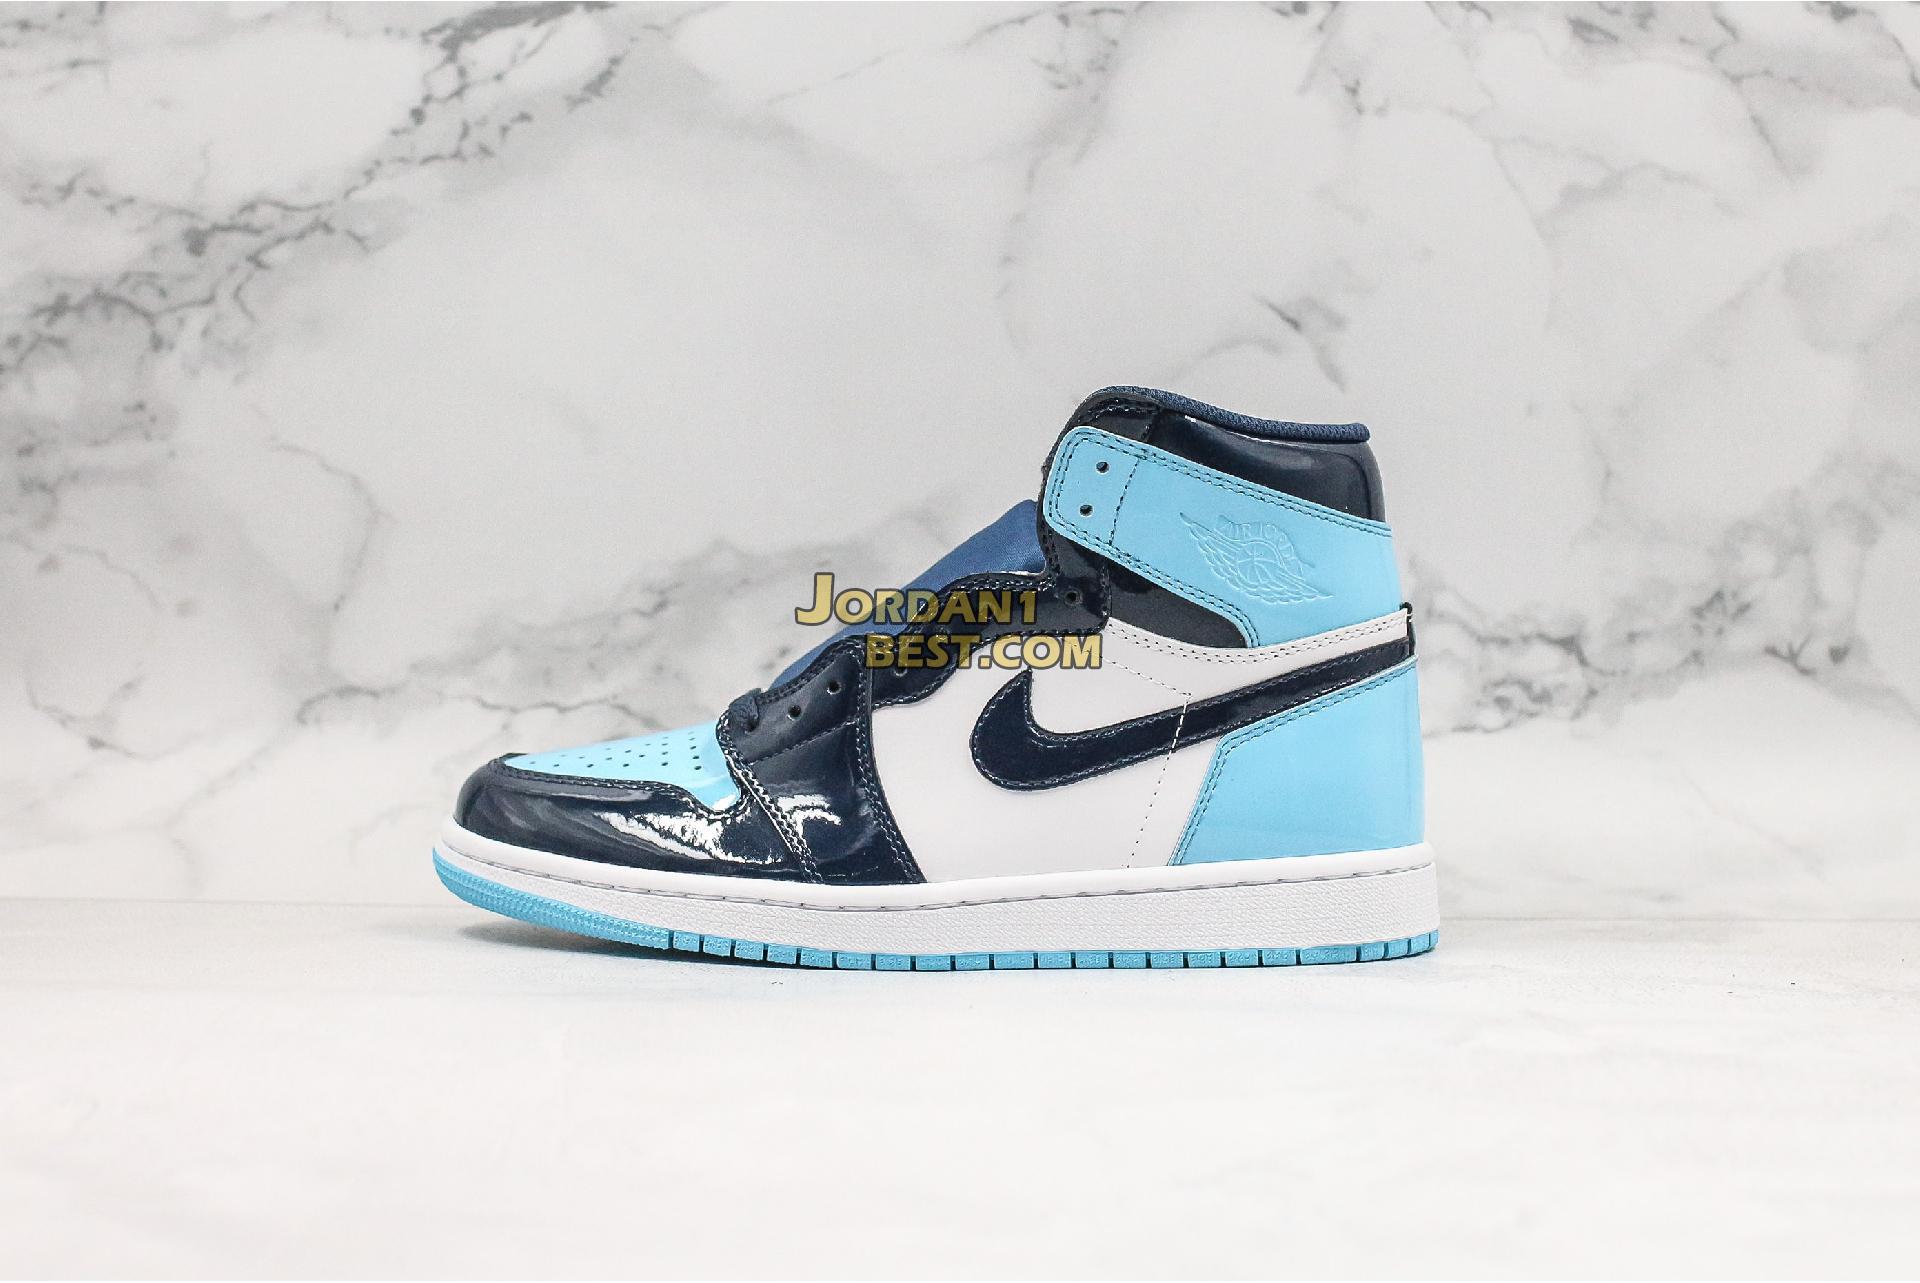 AAA Quality Air Jordan 1 Retro High OG "Blue Chill" CD0461-401 Mens Womens sail/obsidian-university blue Shoes replicas On Wholesale Sale Online